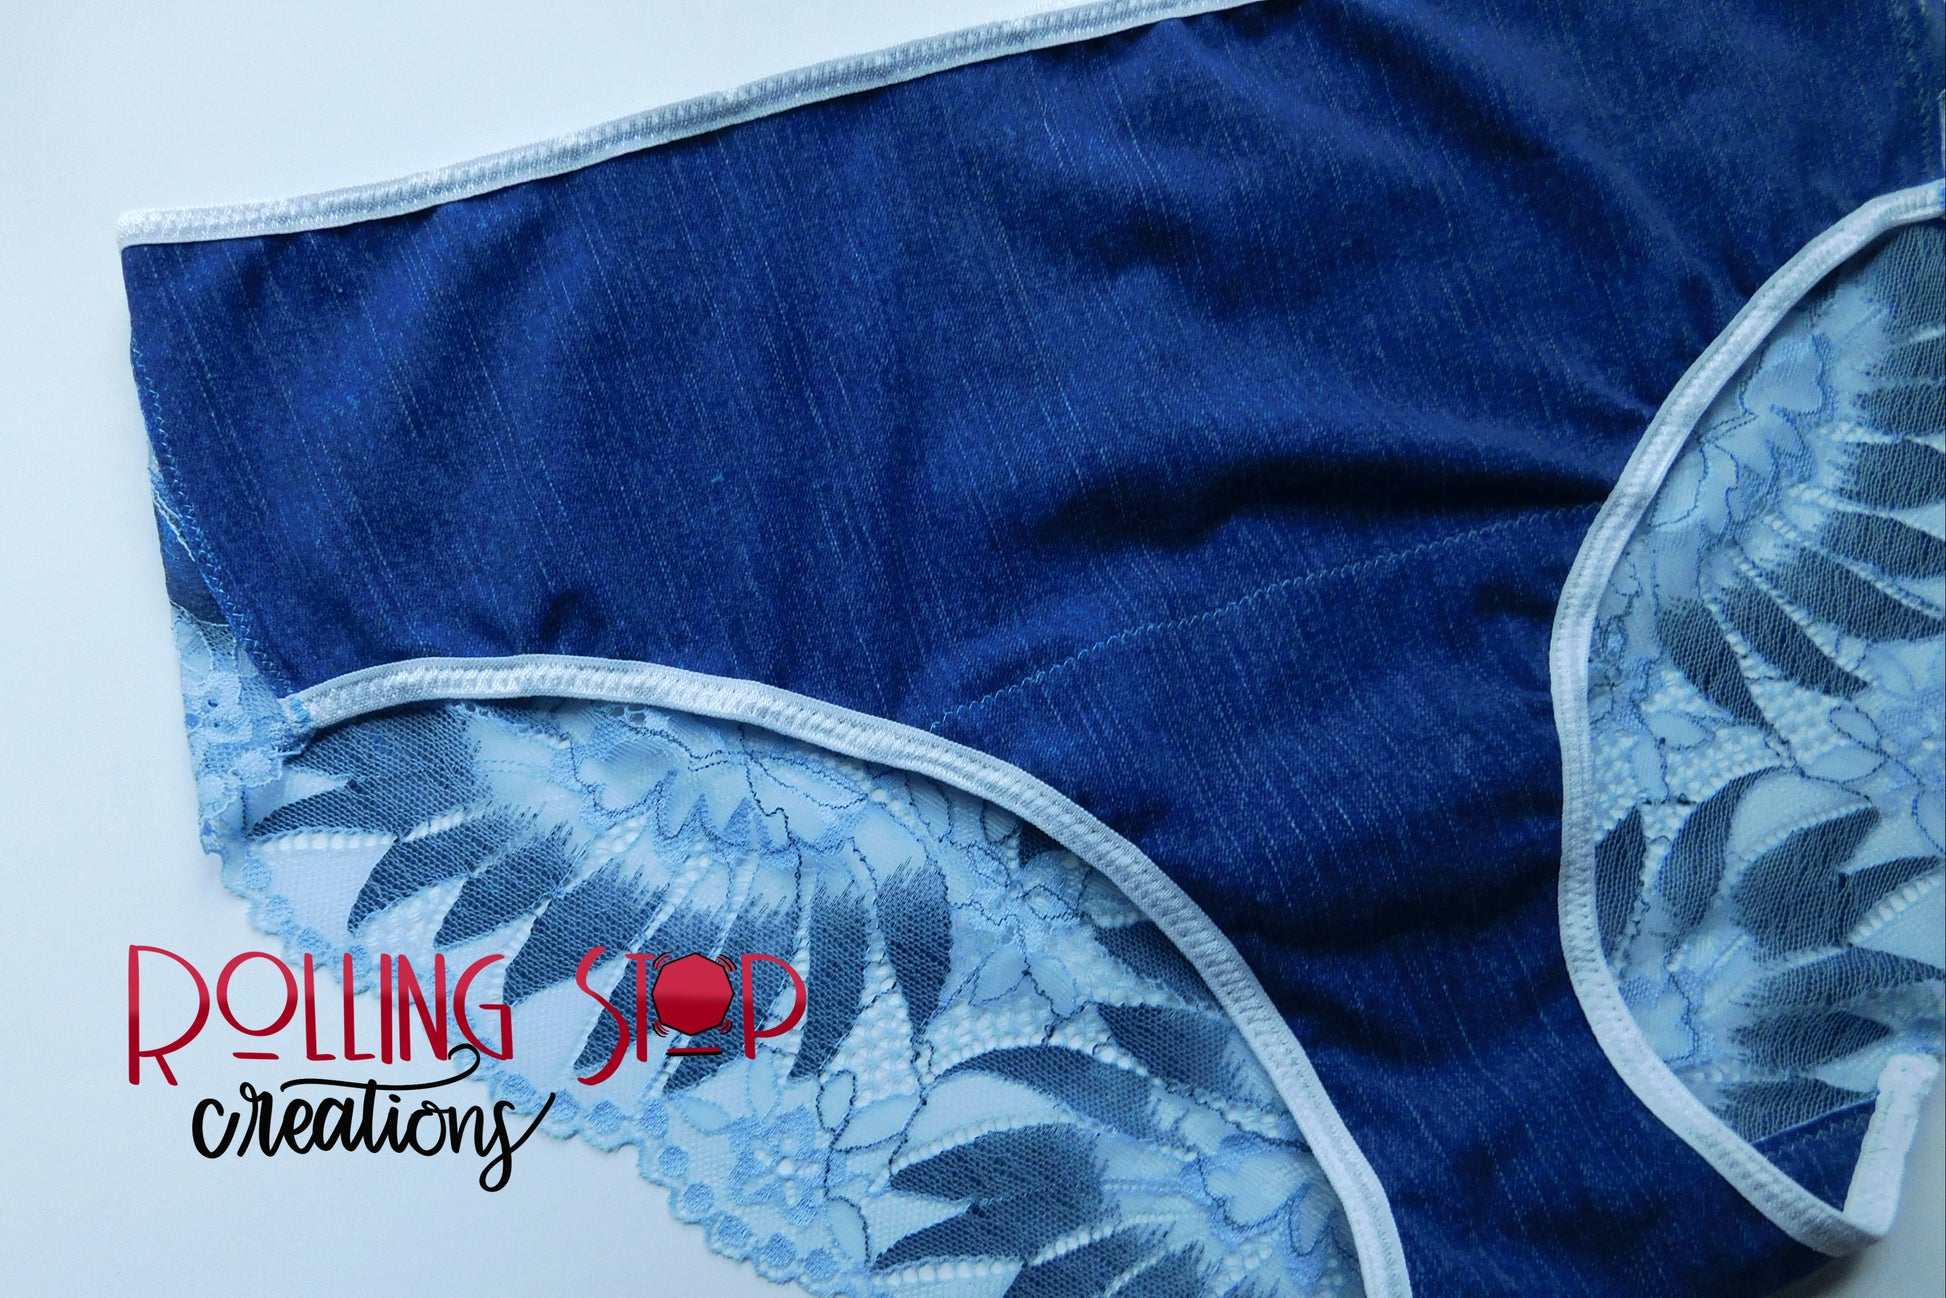 Denim Print Lace Back Pantydrawls by Rolling Stop Creations sold by Rolling Stop Creations Jundies - Lace - Lingerie